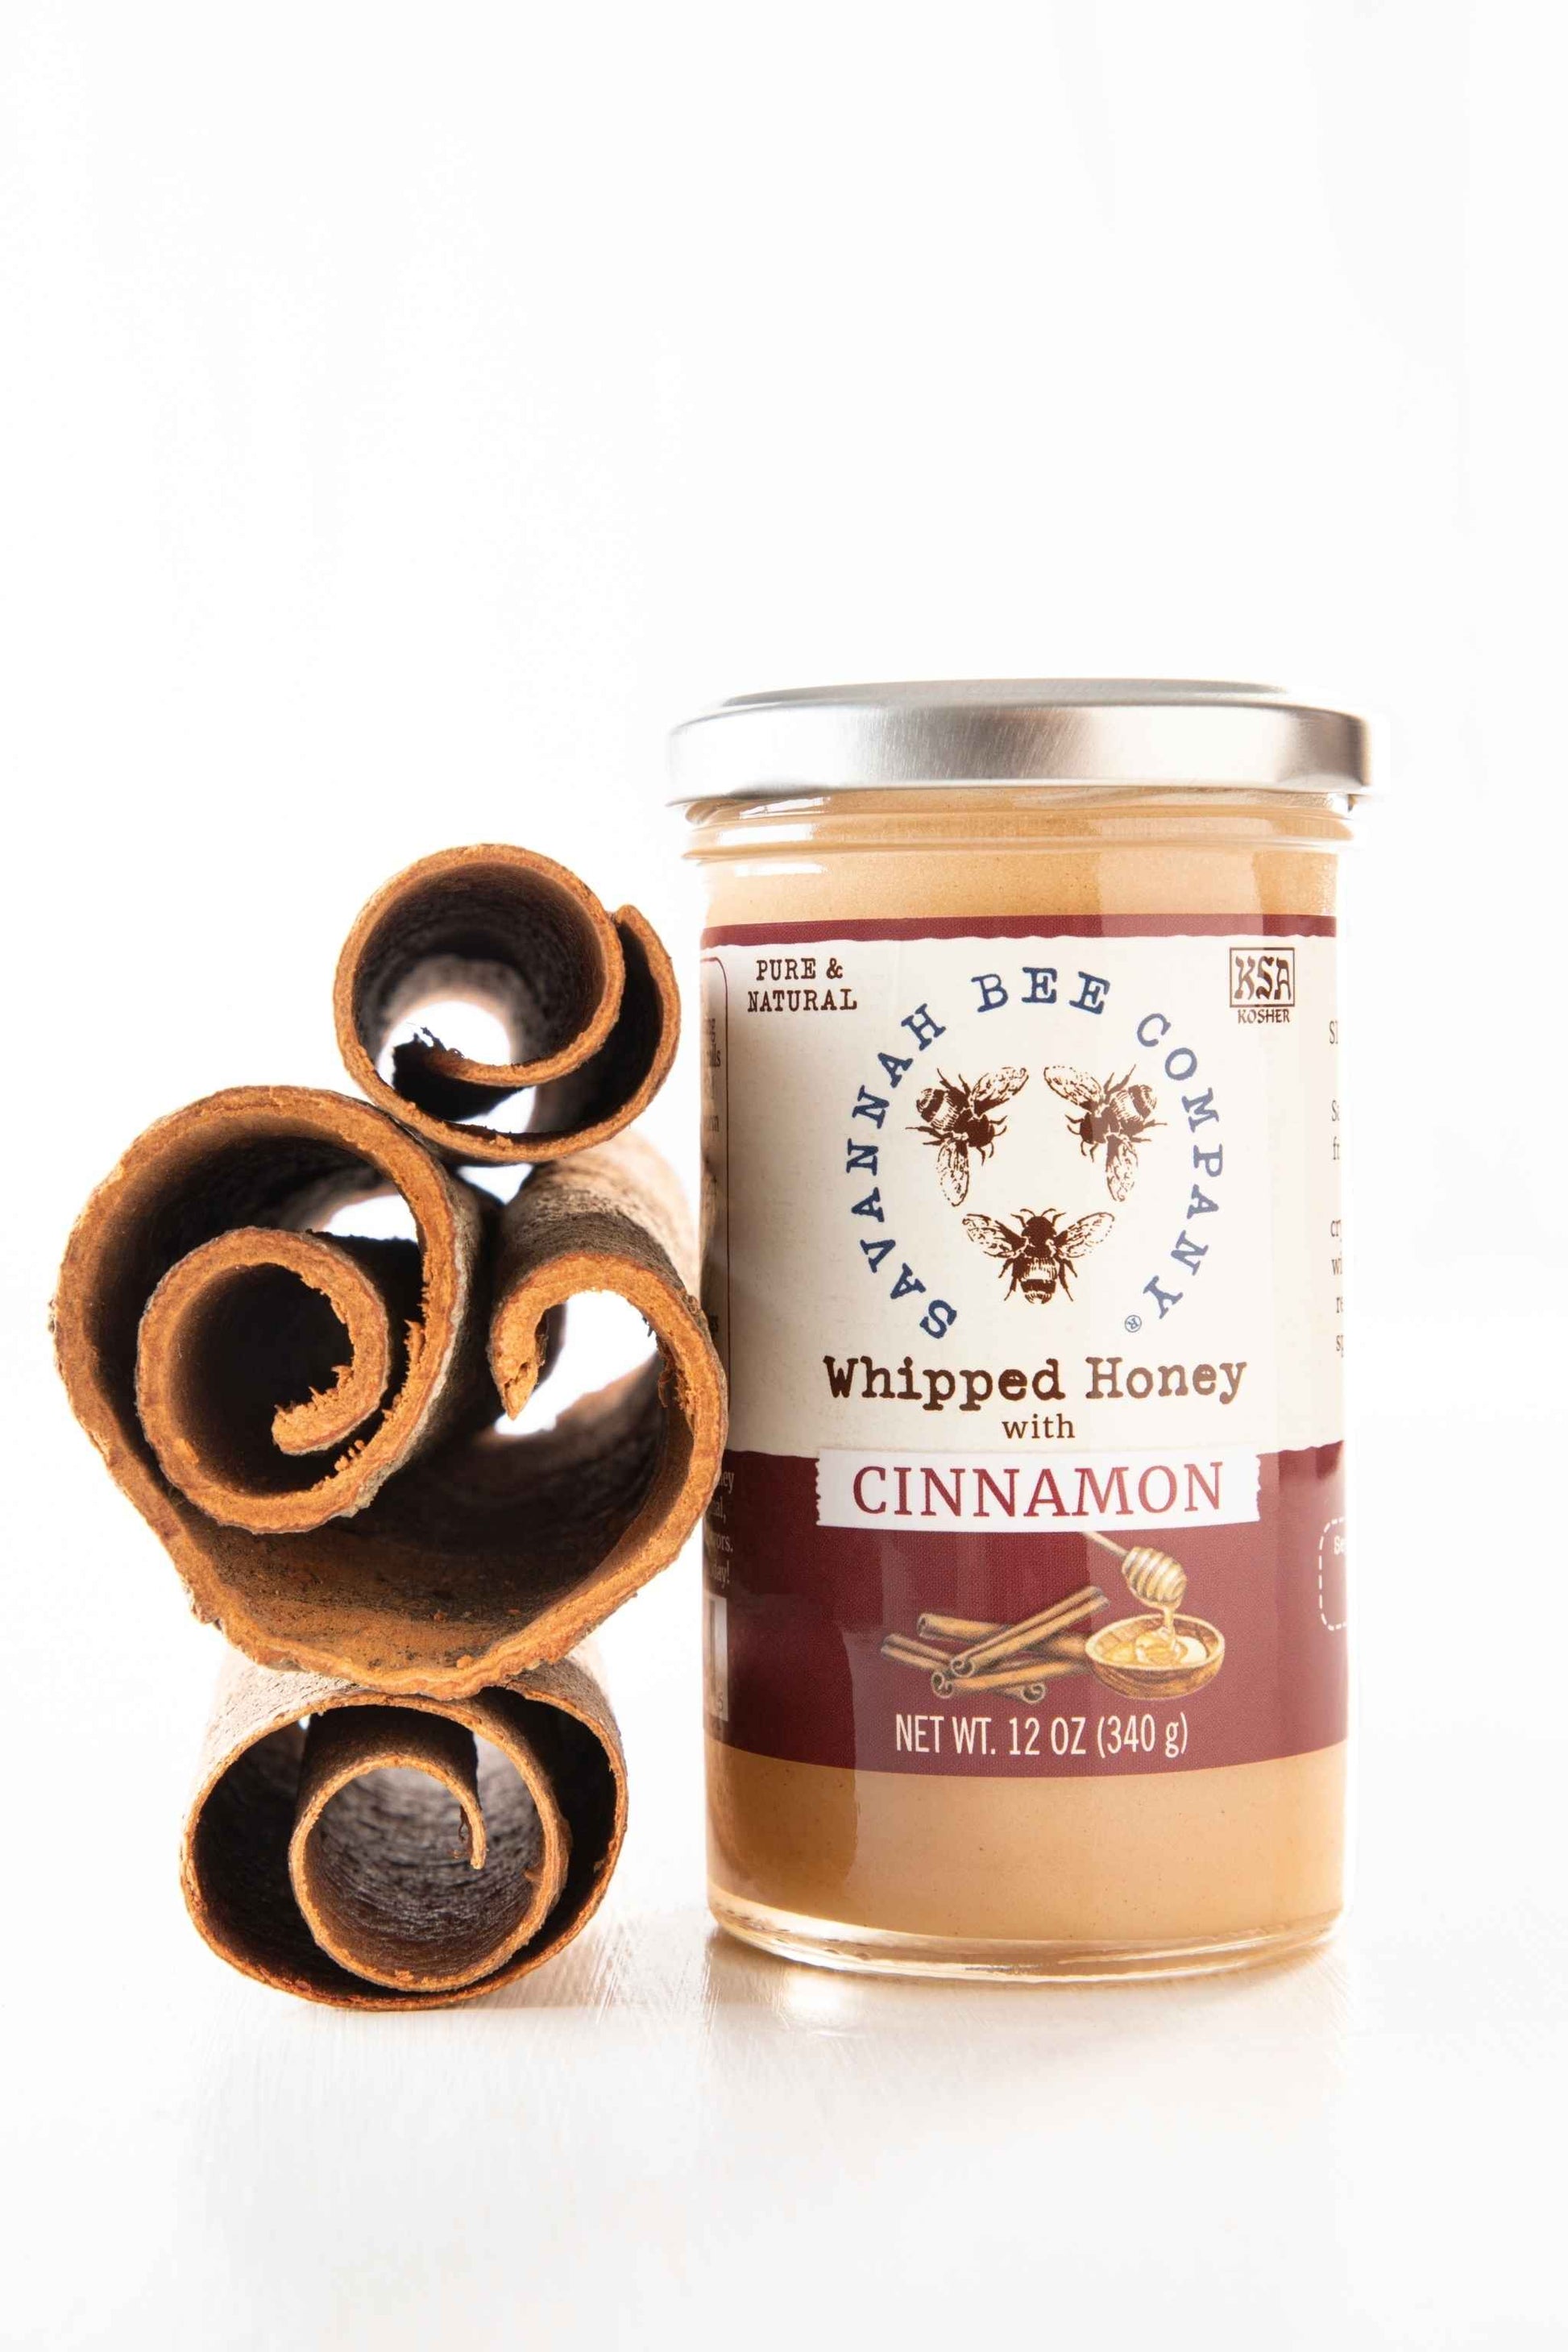 Whipped Honey with Cinnamon 12 oz. 